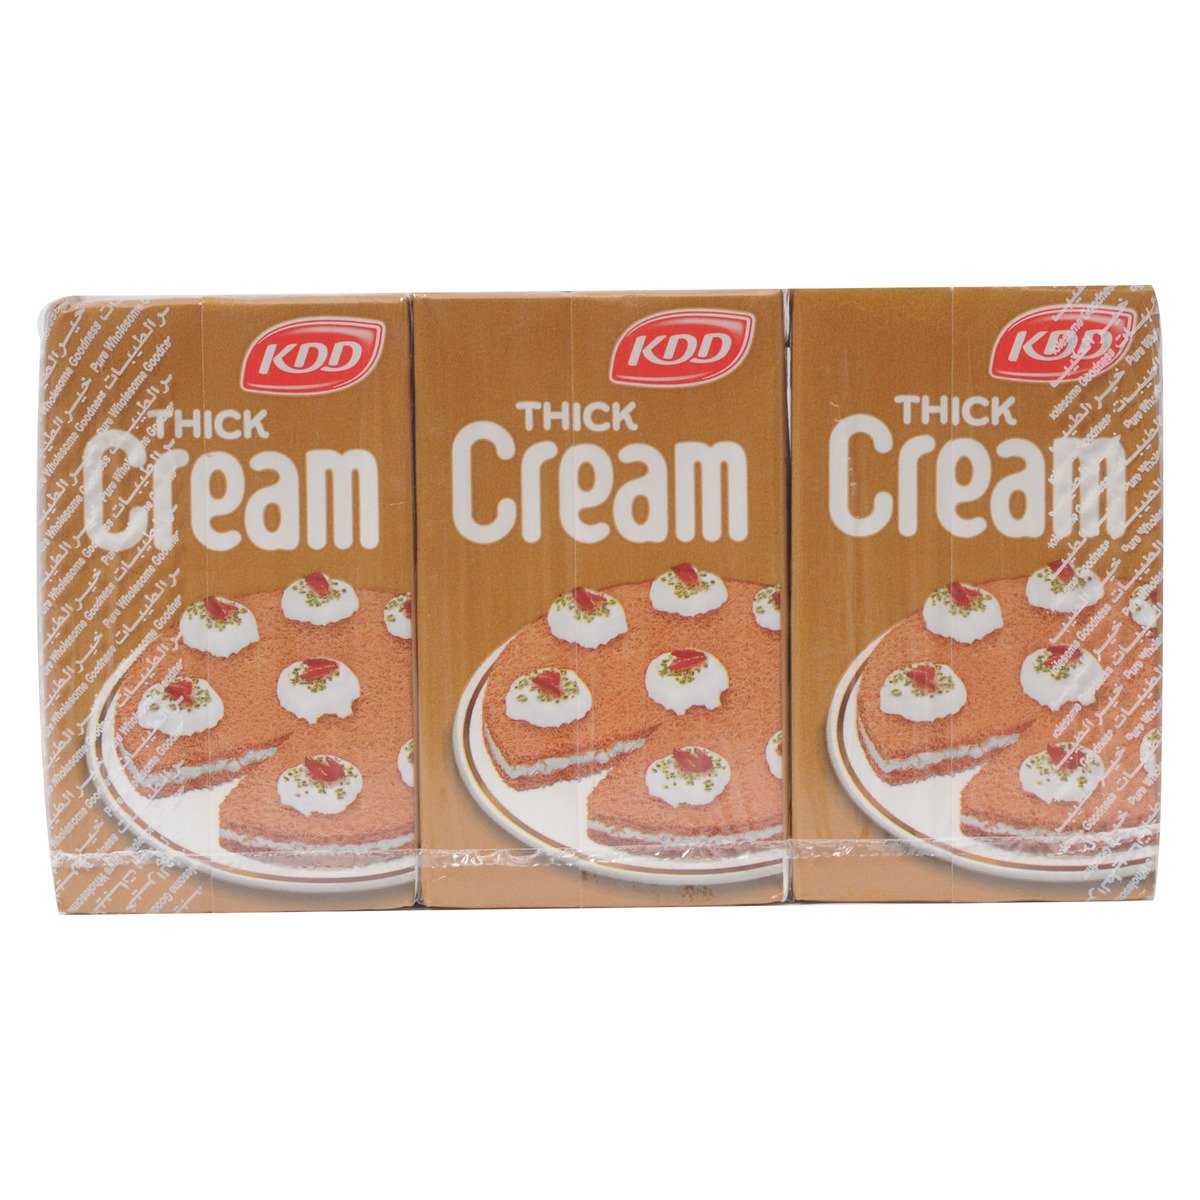 Buy KDD Thick Cream 3 x 250 ml Online at Best Price | Other Dairy Products | Lulu UAE in Saudi Arabia